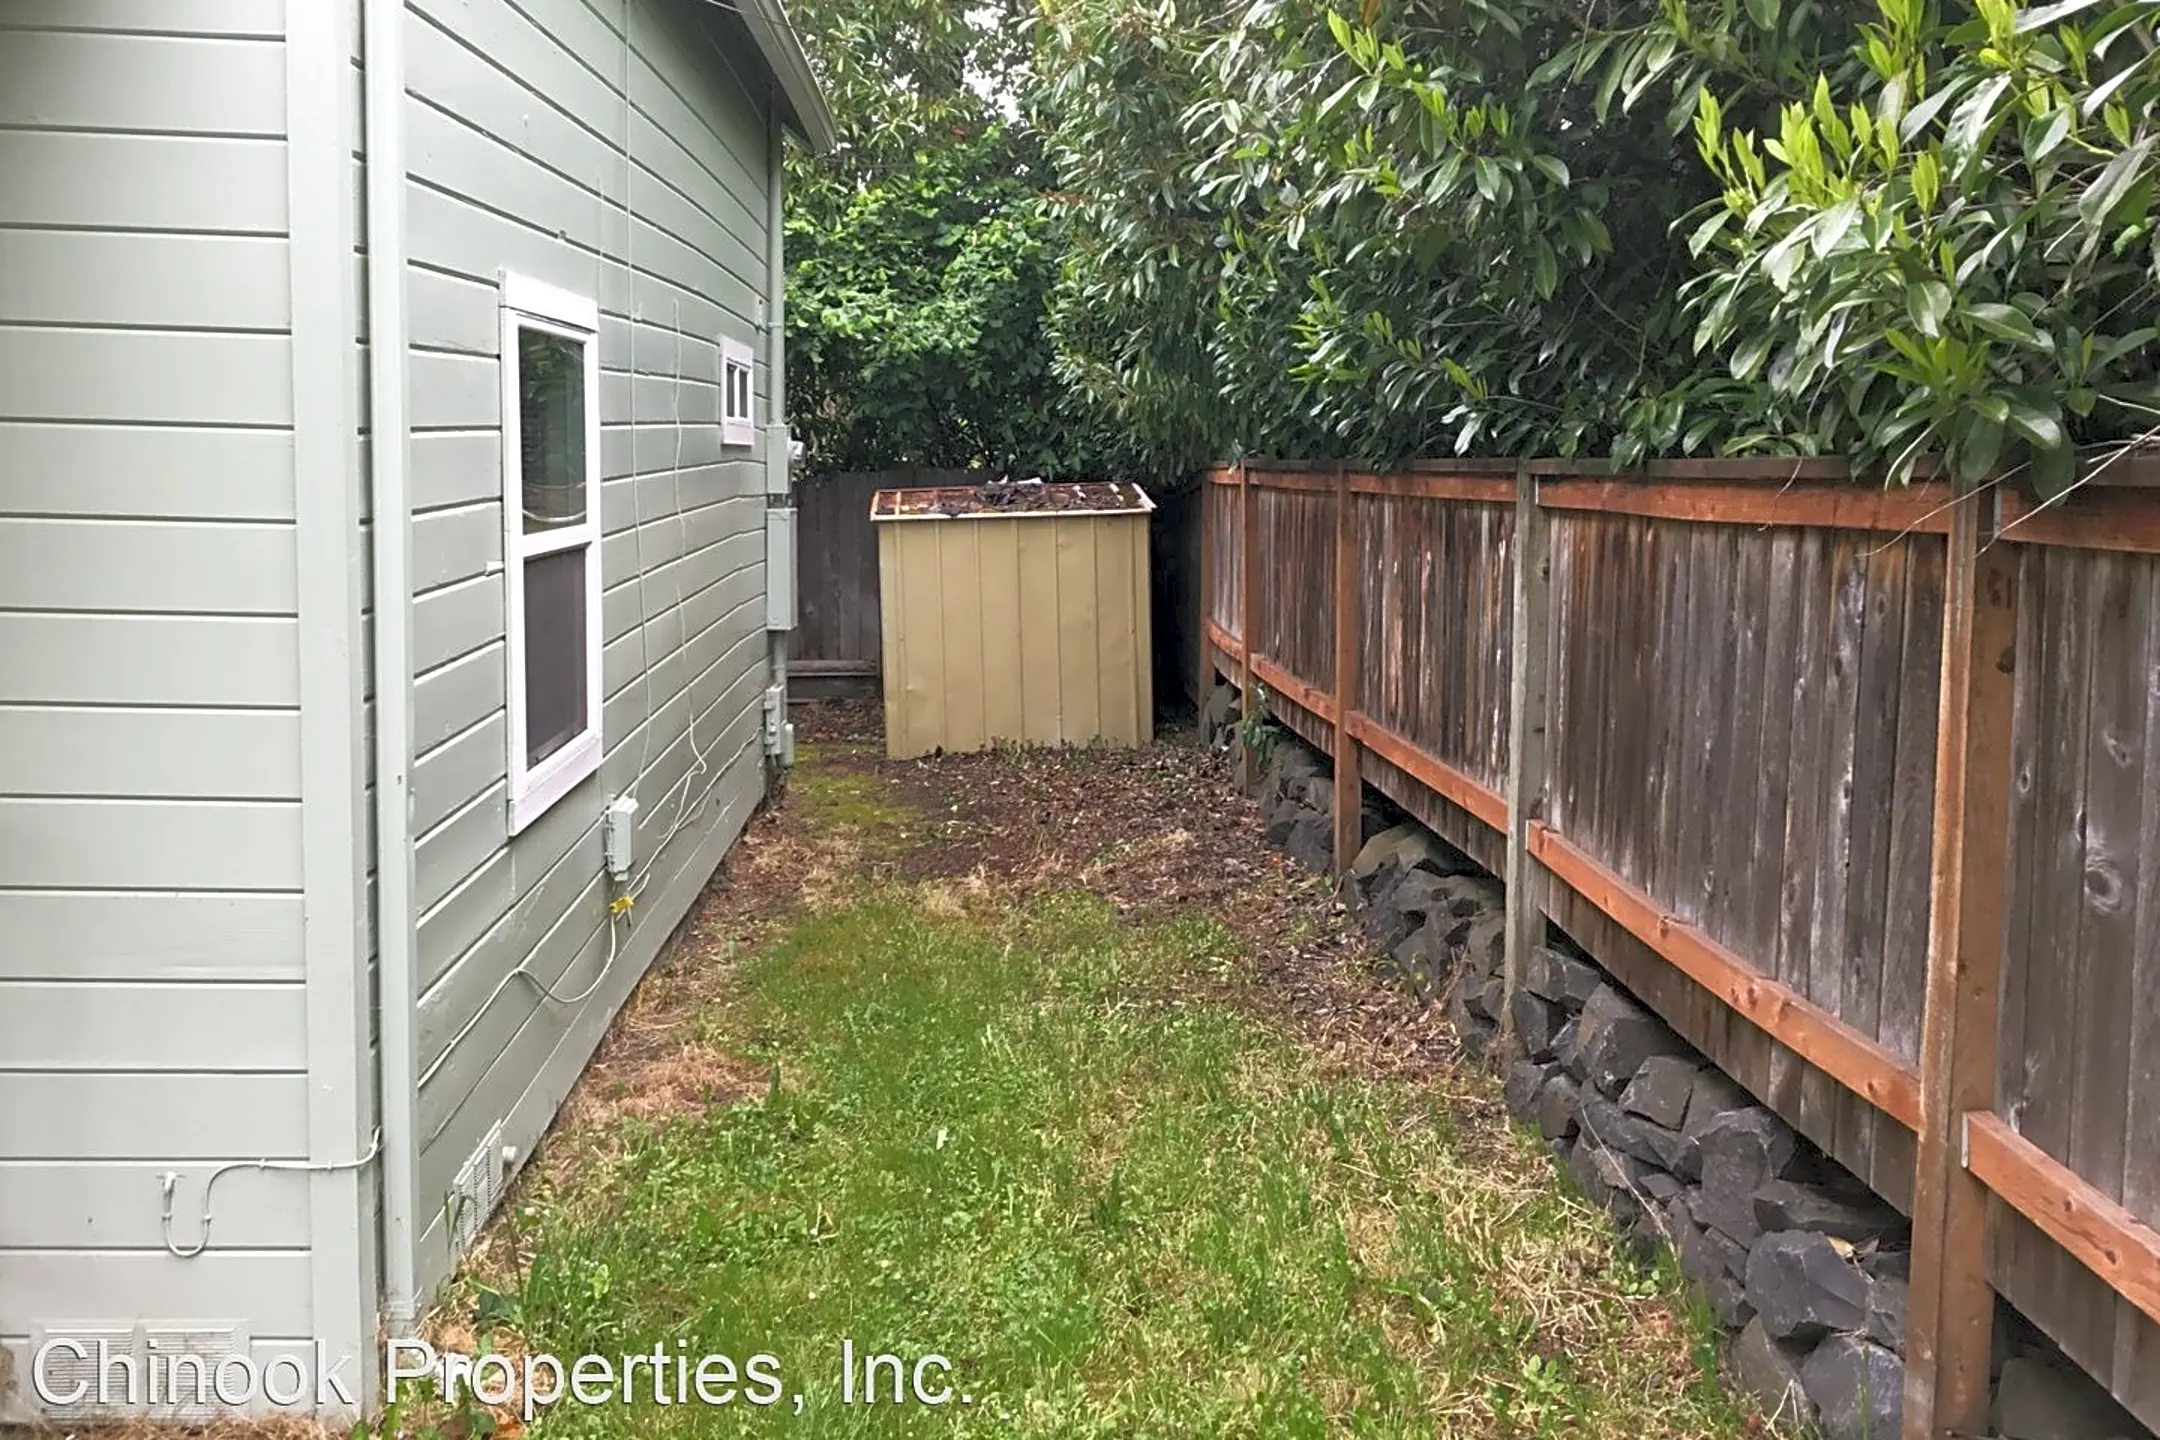 Patio / Deck - 609 W 25th Pl - Eugene, OR